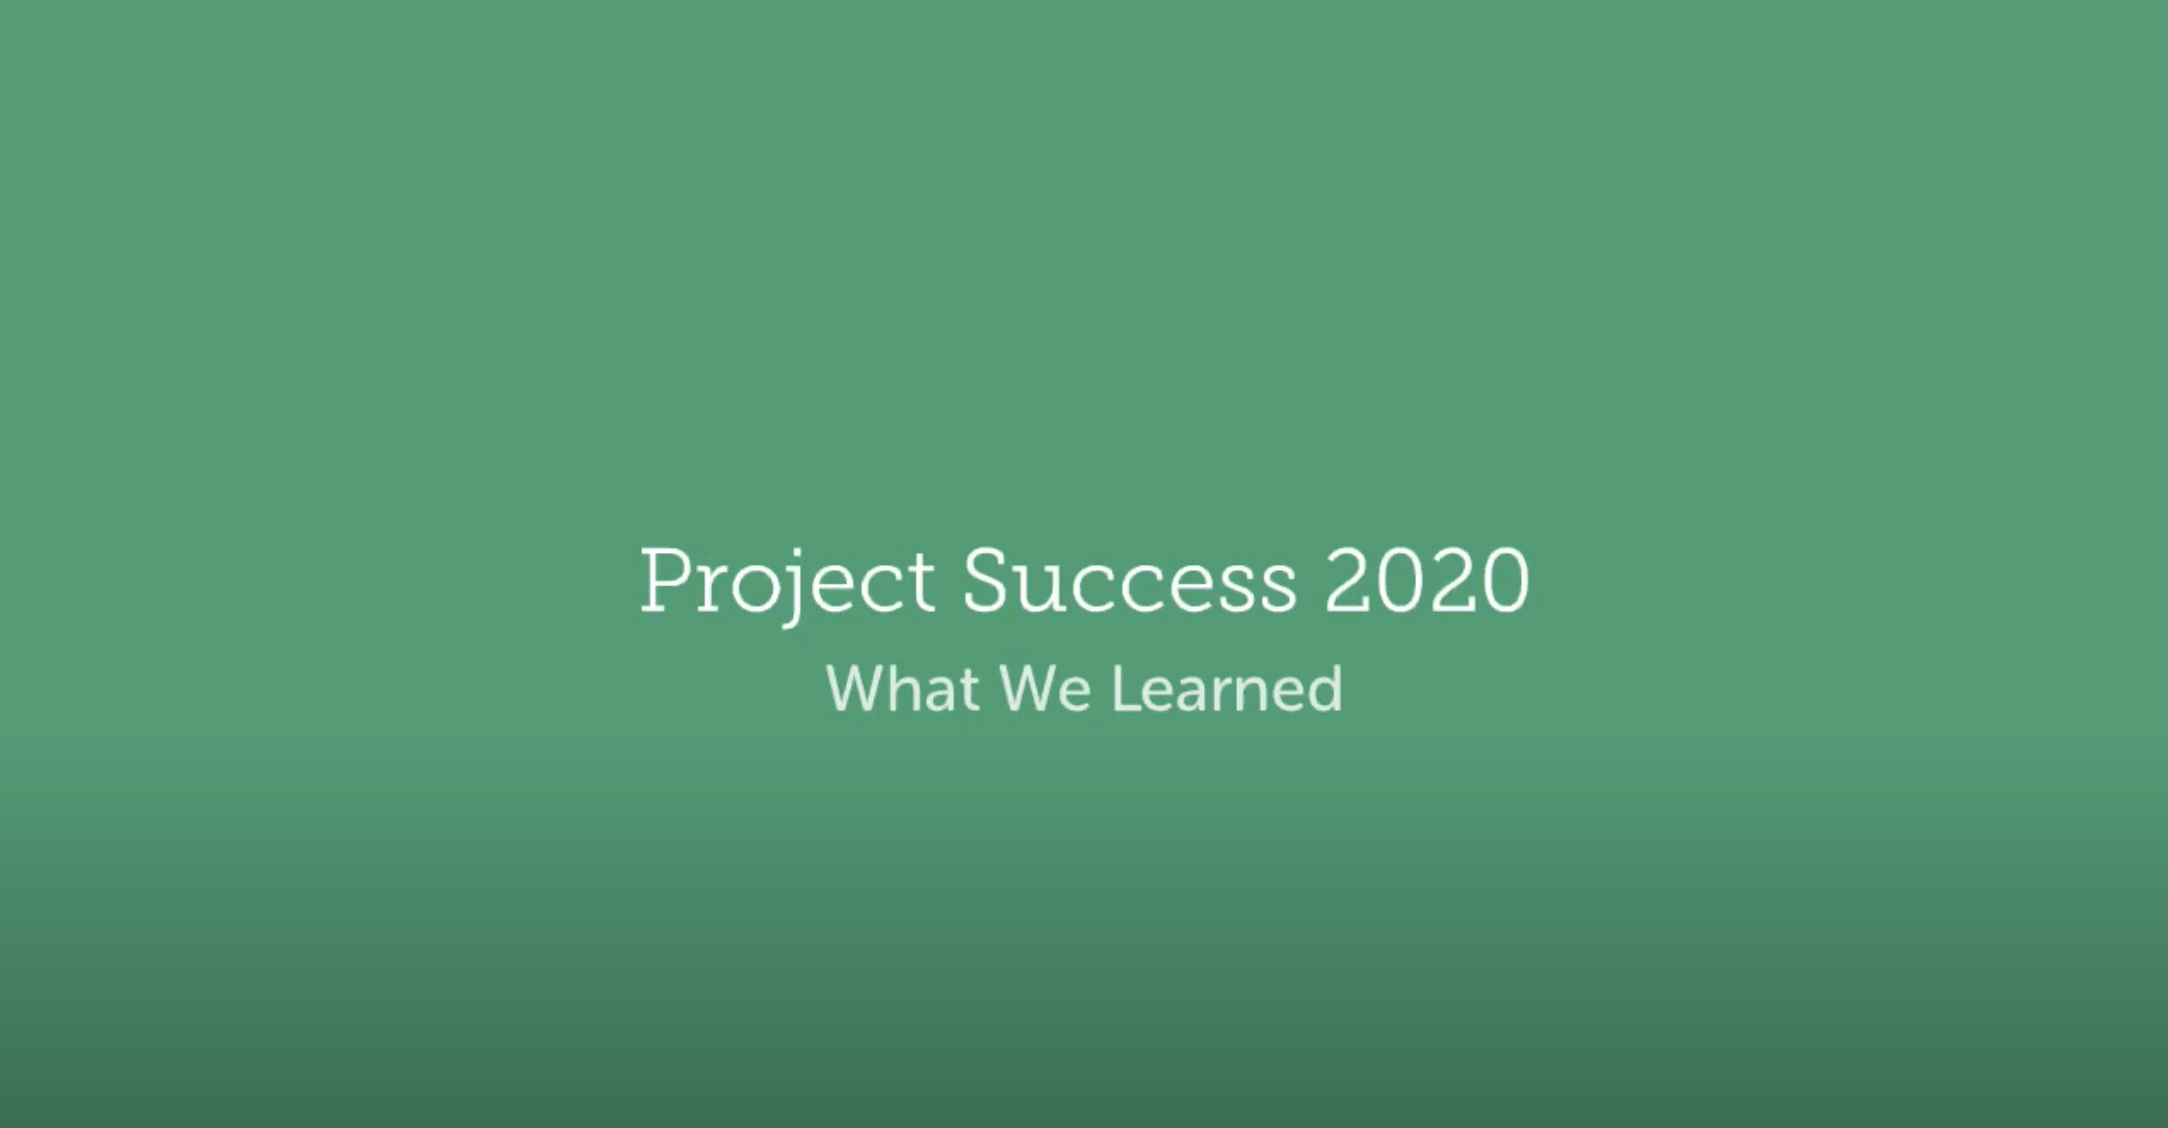 Project Success 2020: What we learned